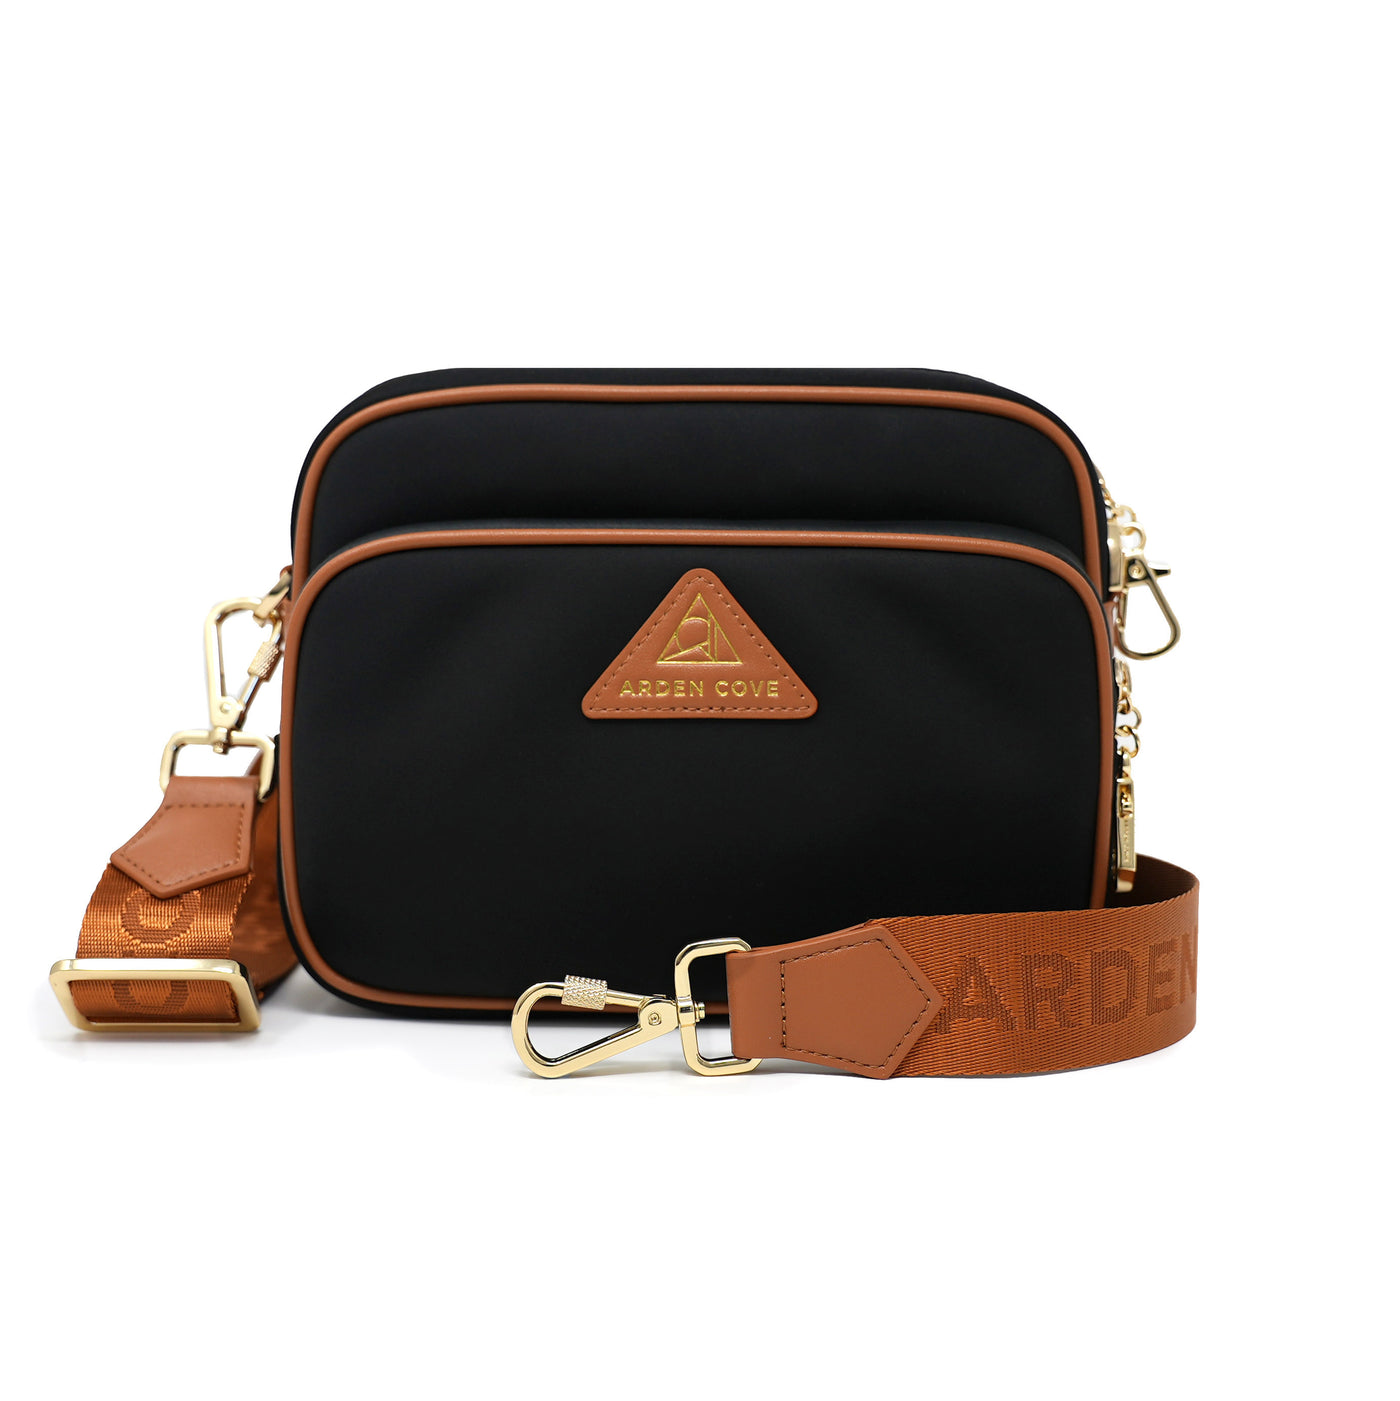 Anti-theft Water-resistant Travel Crossbody - Crissy Full Crossbody in Black/Brown Gold with locking clasps nylon jacquard straps - front view - Arden Cove